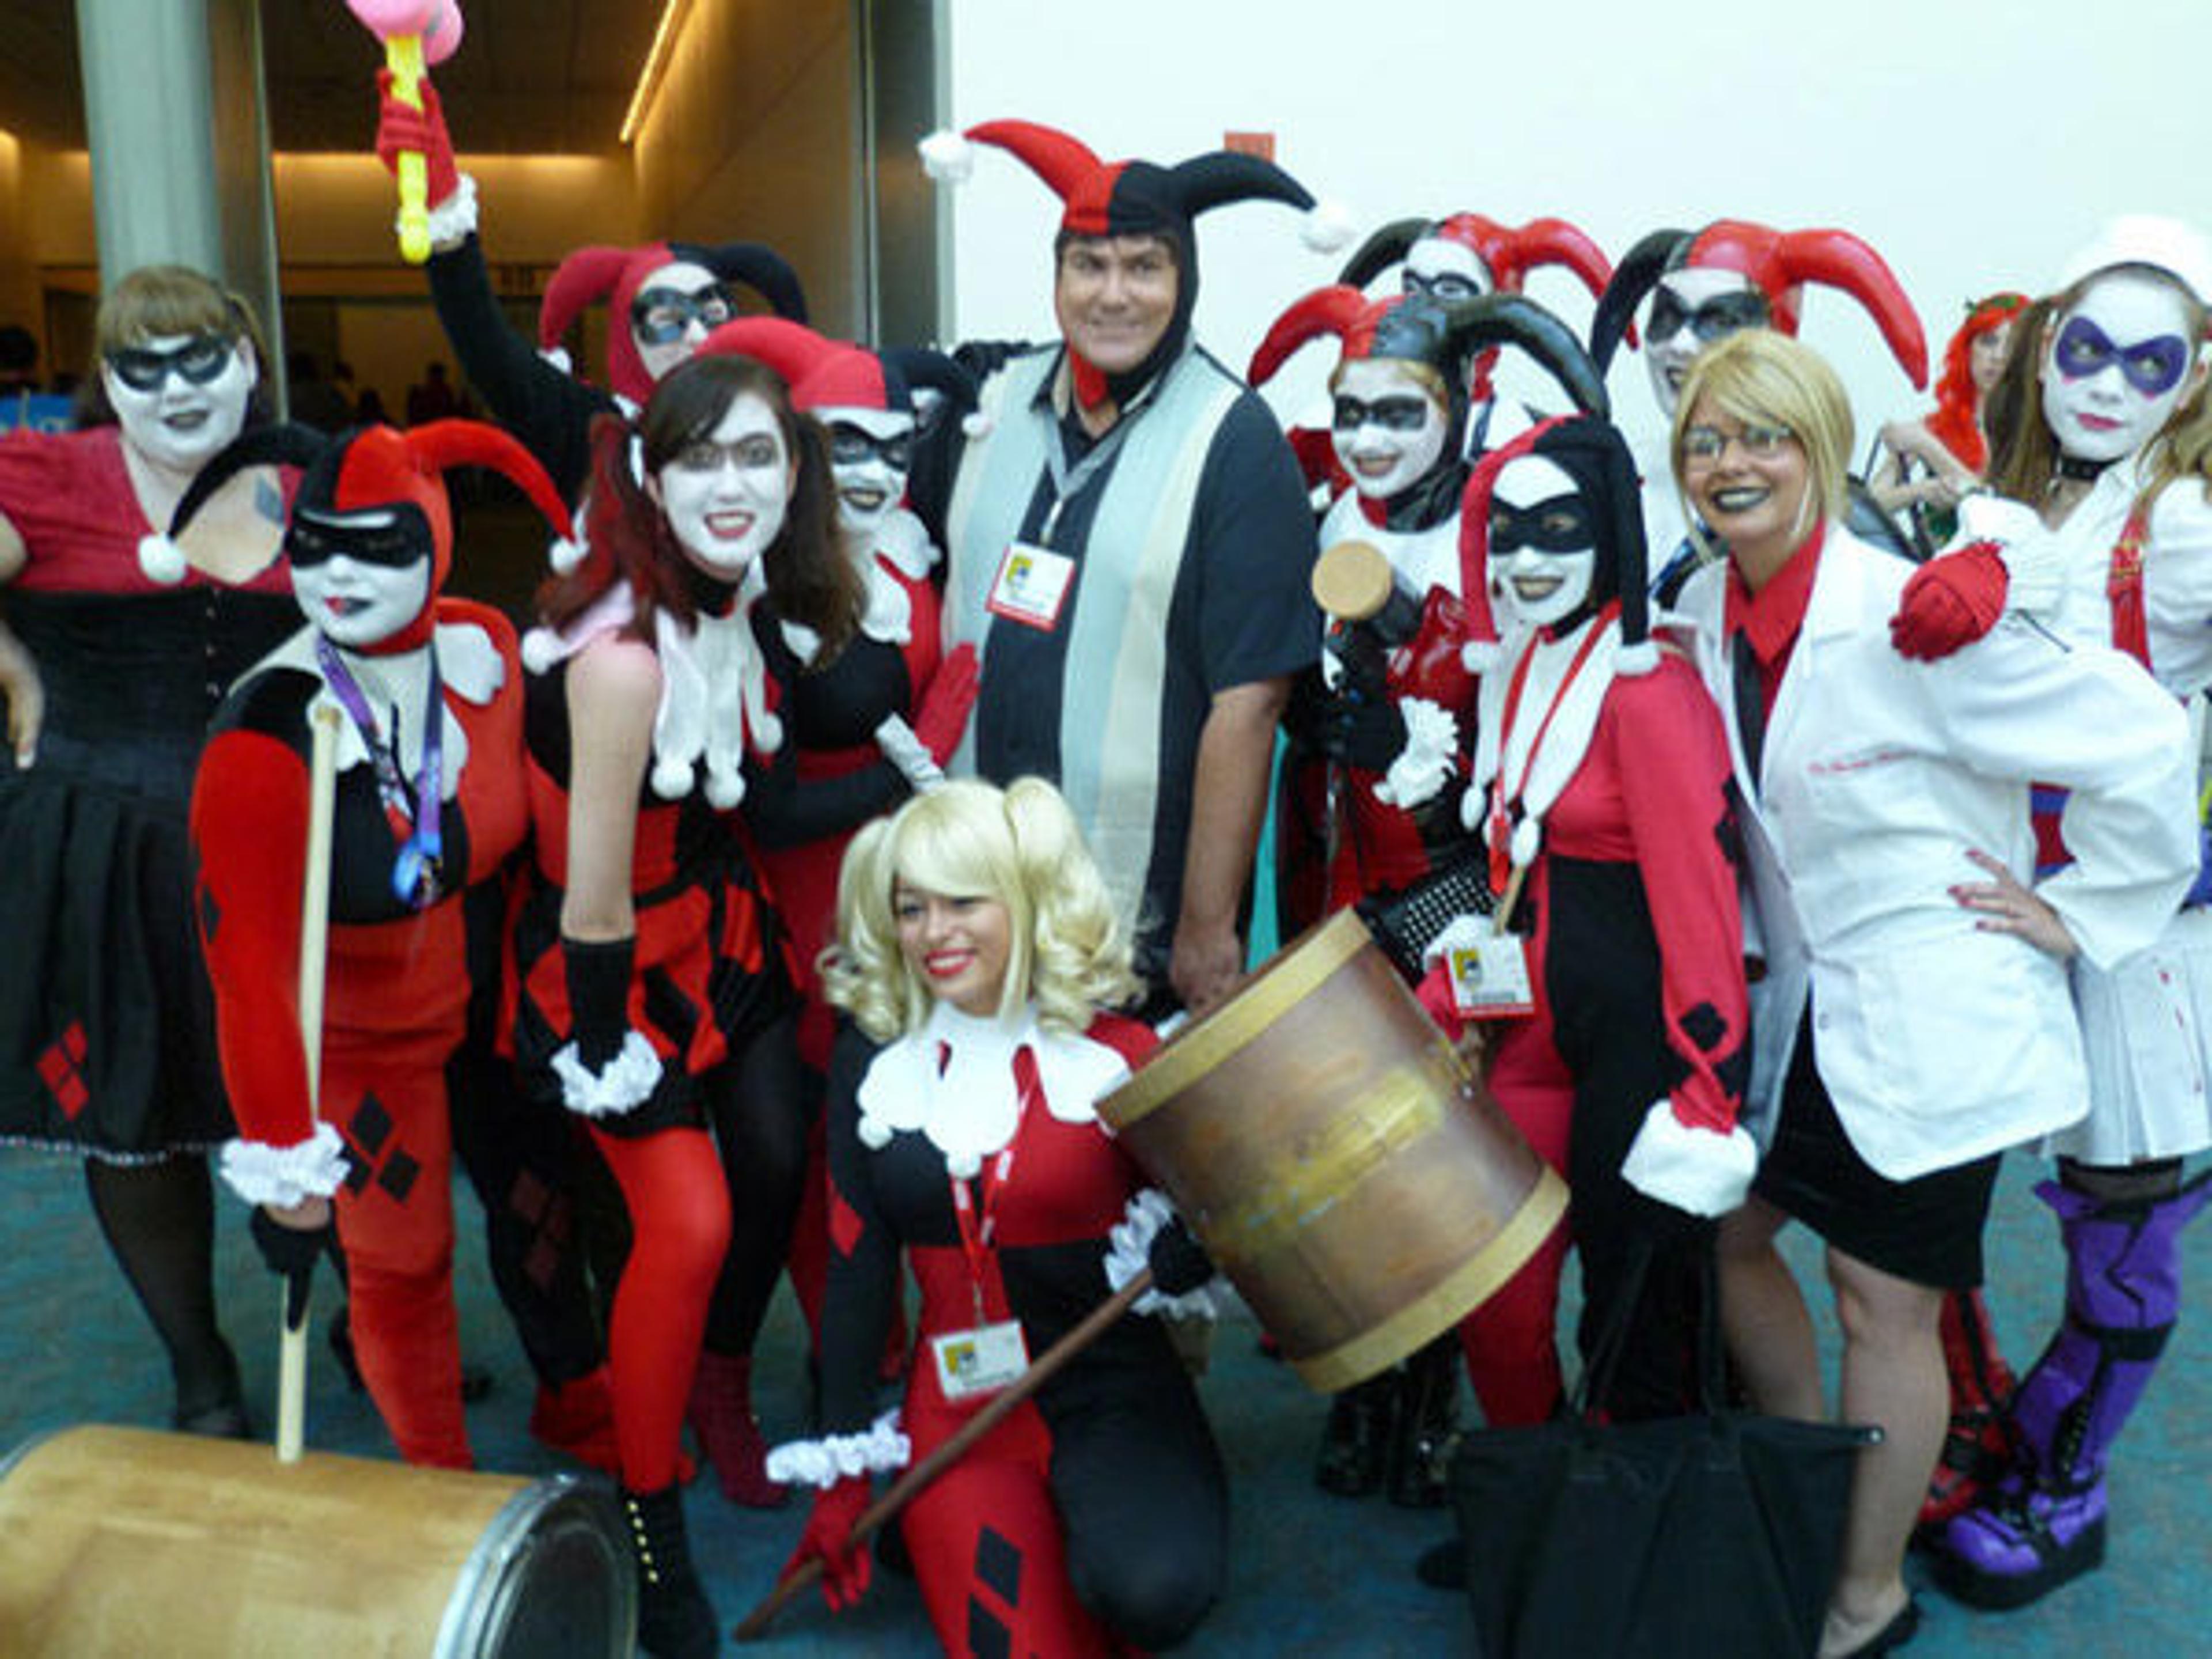 Paul Dini surrounded by women dressed up as Harley Quinn